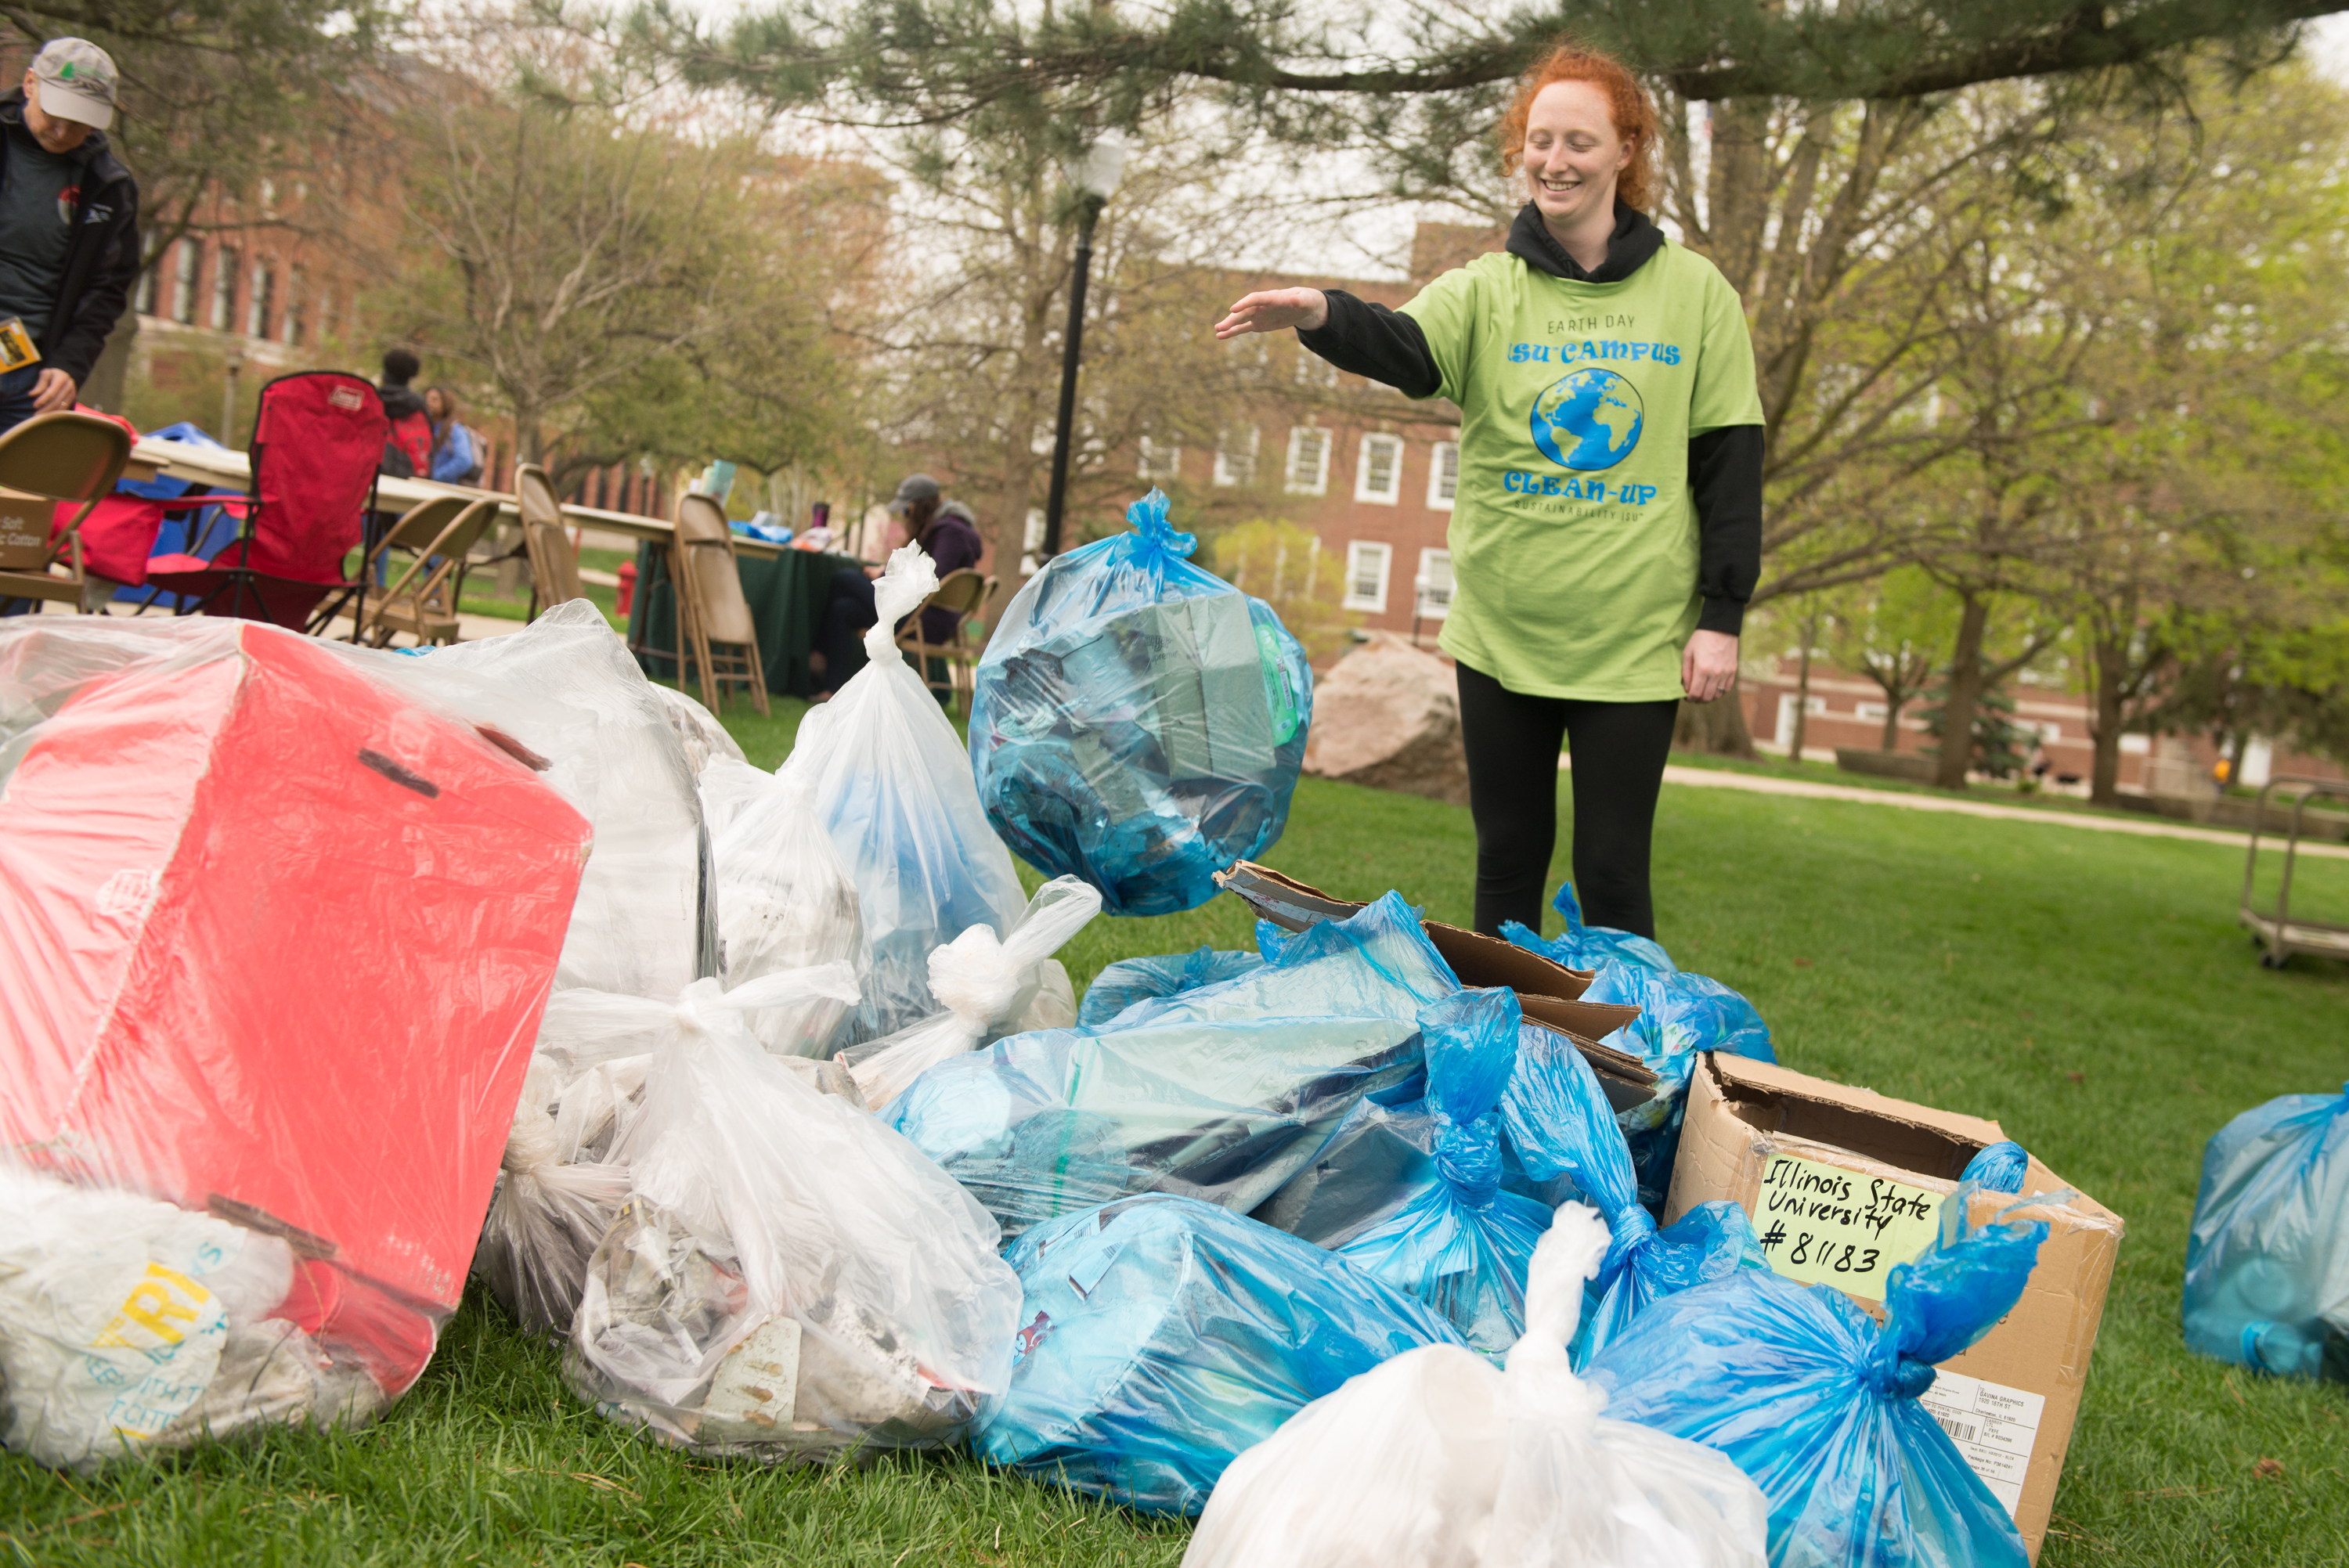 Volunteers removed about 300 pounds of waste from campus and the surrounding areas.